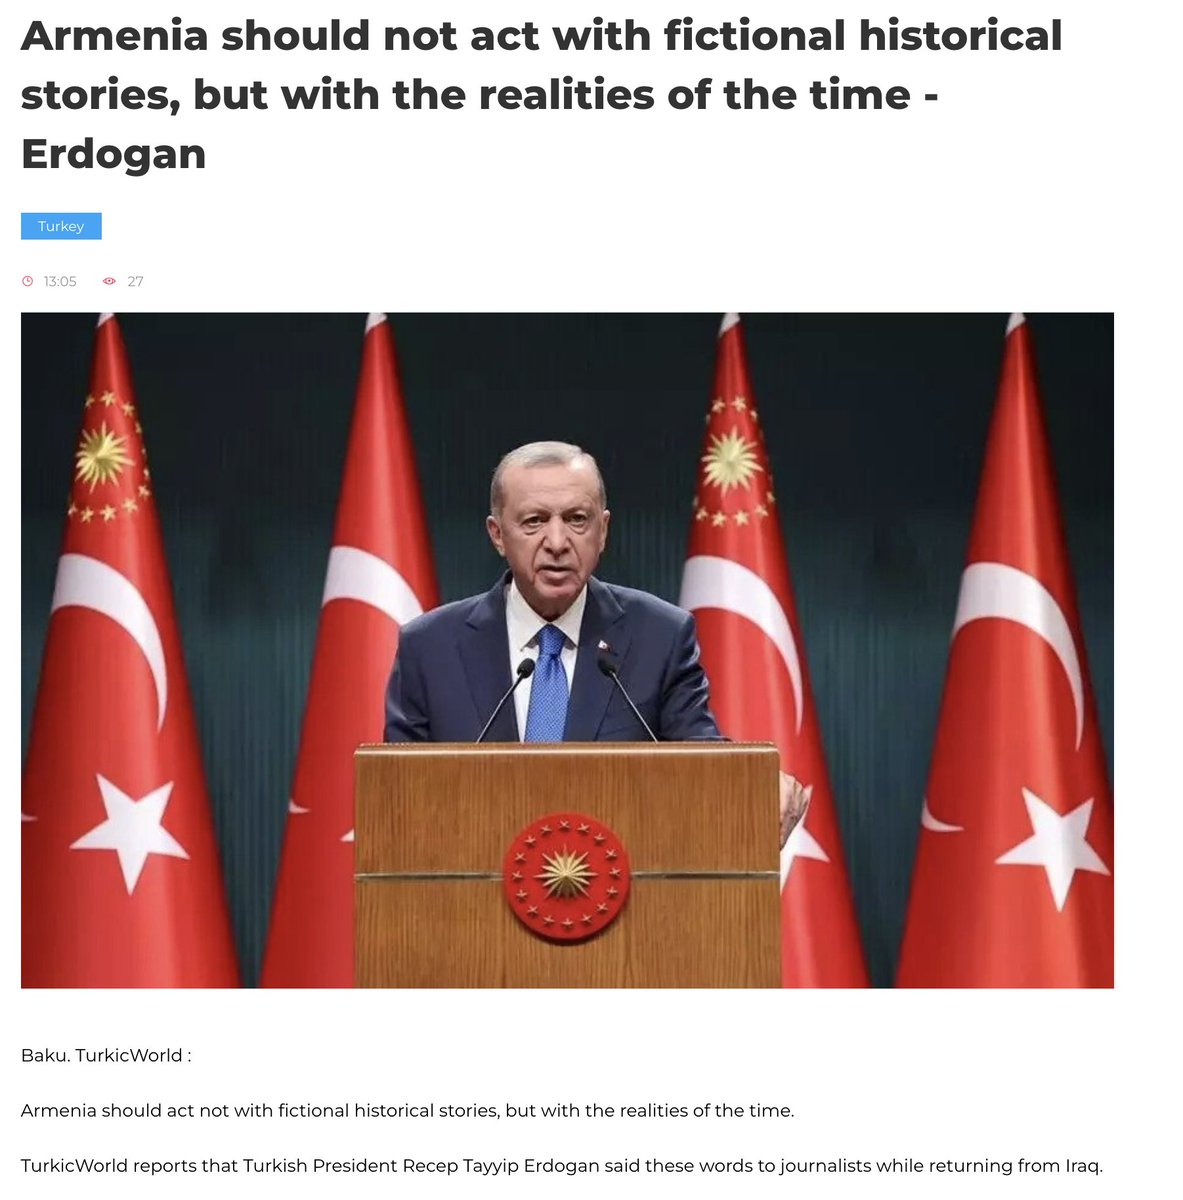 'Armenia should not act with fictional historical stories,' says man trying to rebuild the Ottoman Empire